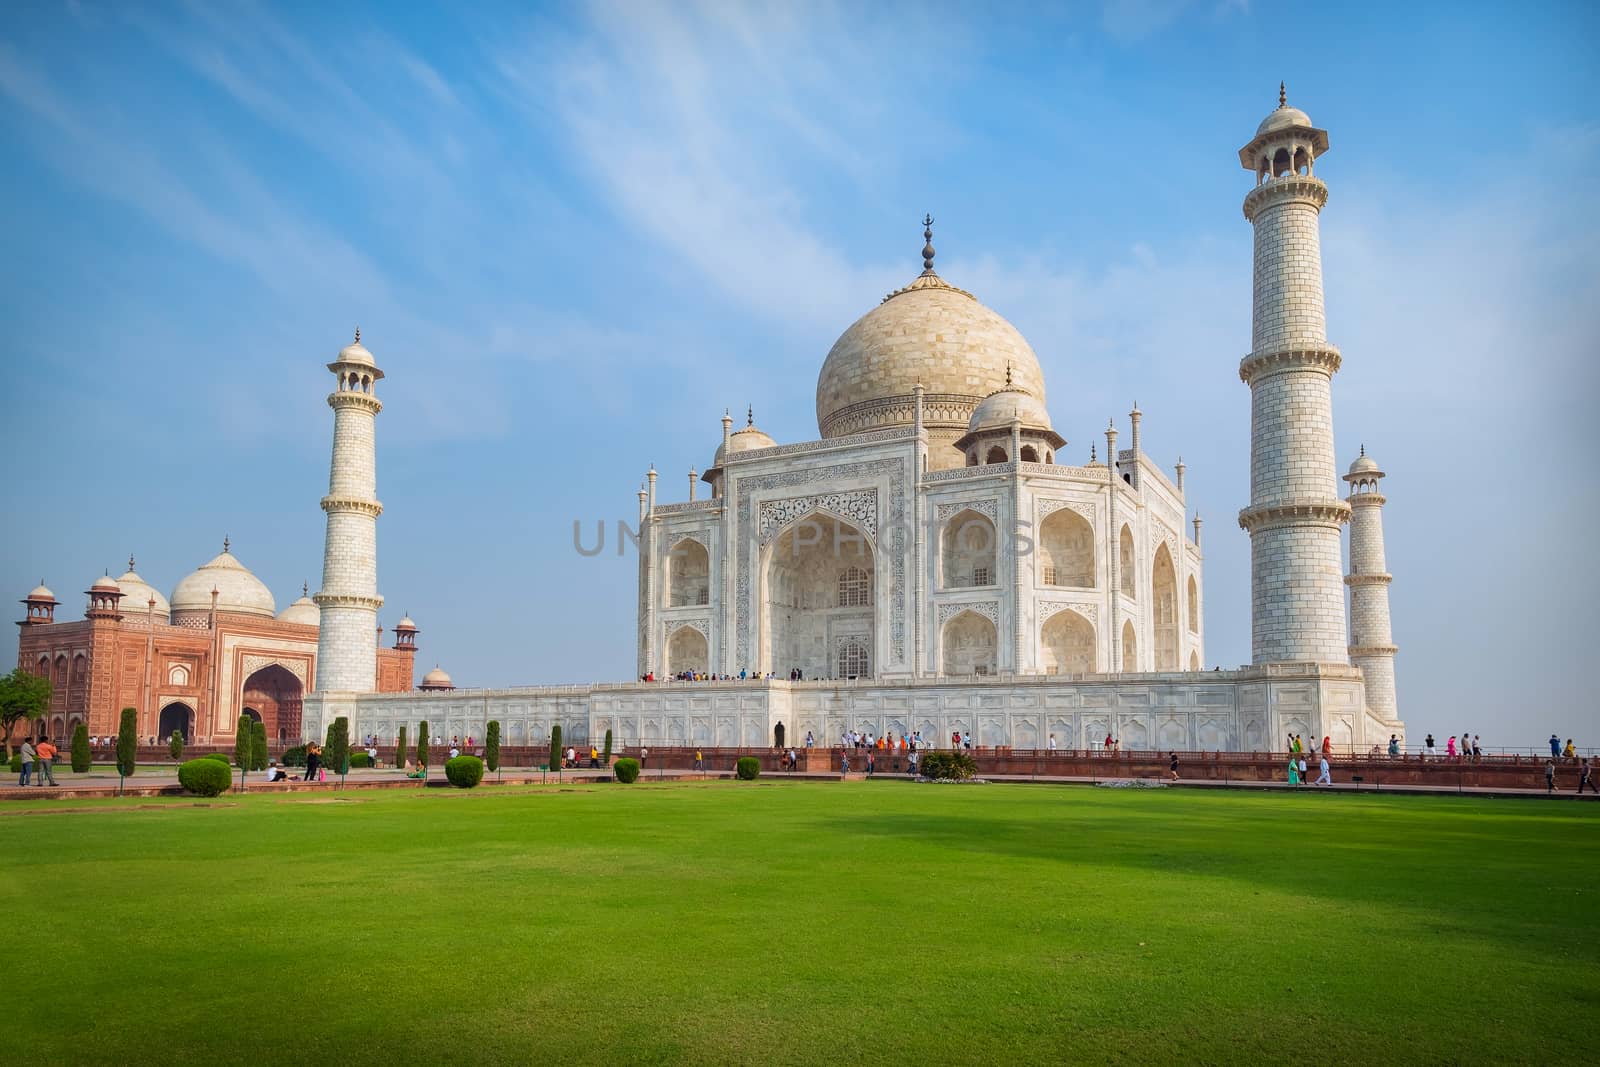 Taj Mahal on a sunny day. An ivory-white marble mausoleum on the south bank of the Yamuna river in Agra, Uttar Pradesh, India. One of the seven wonders of the world.